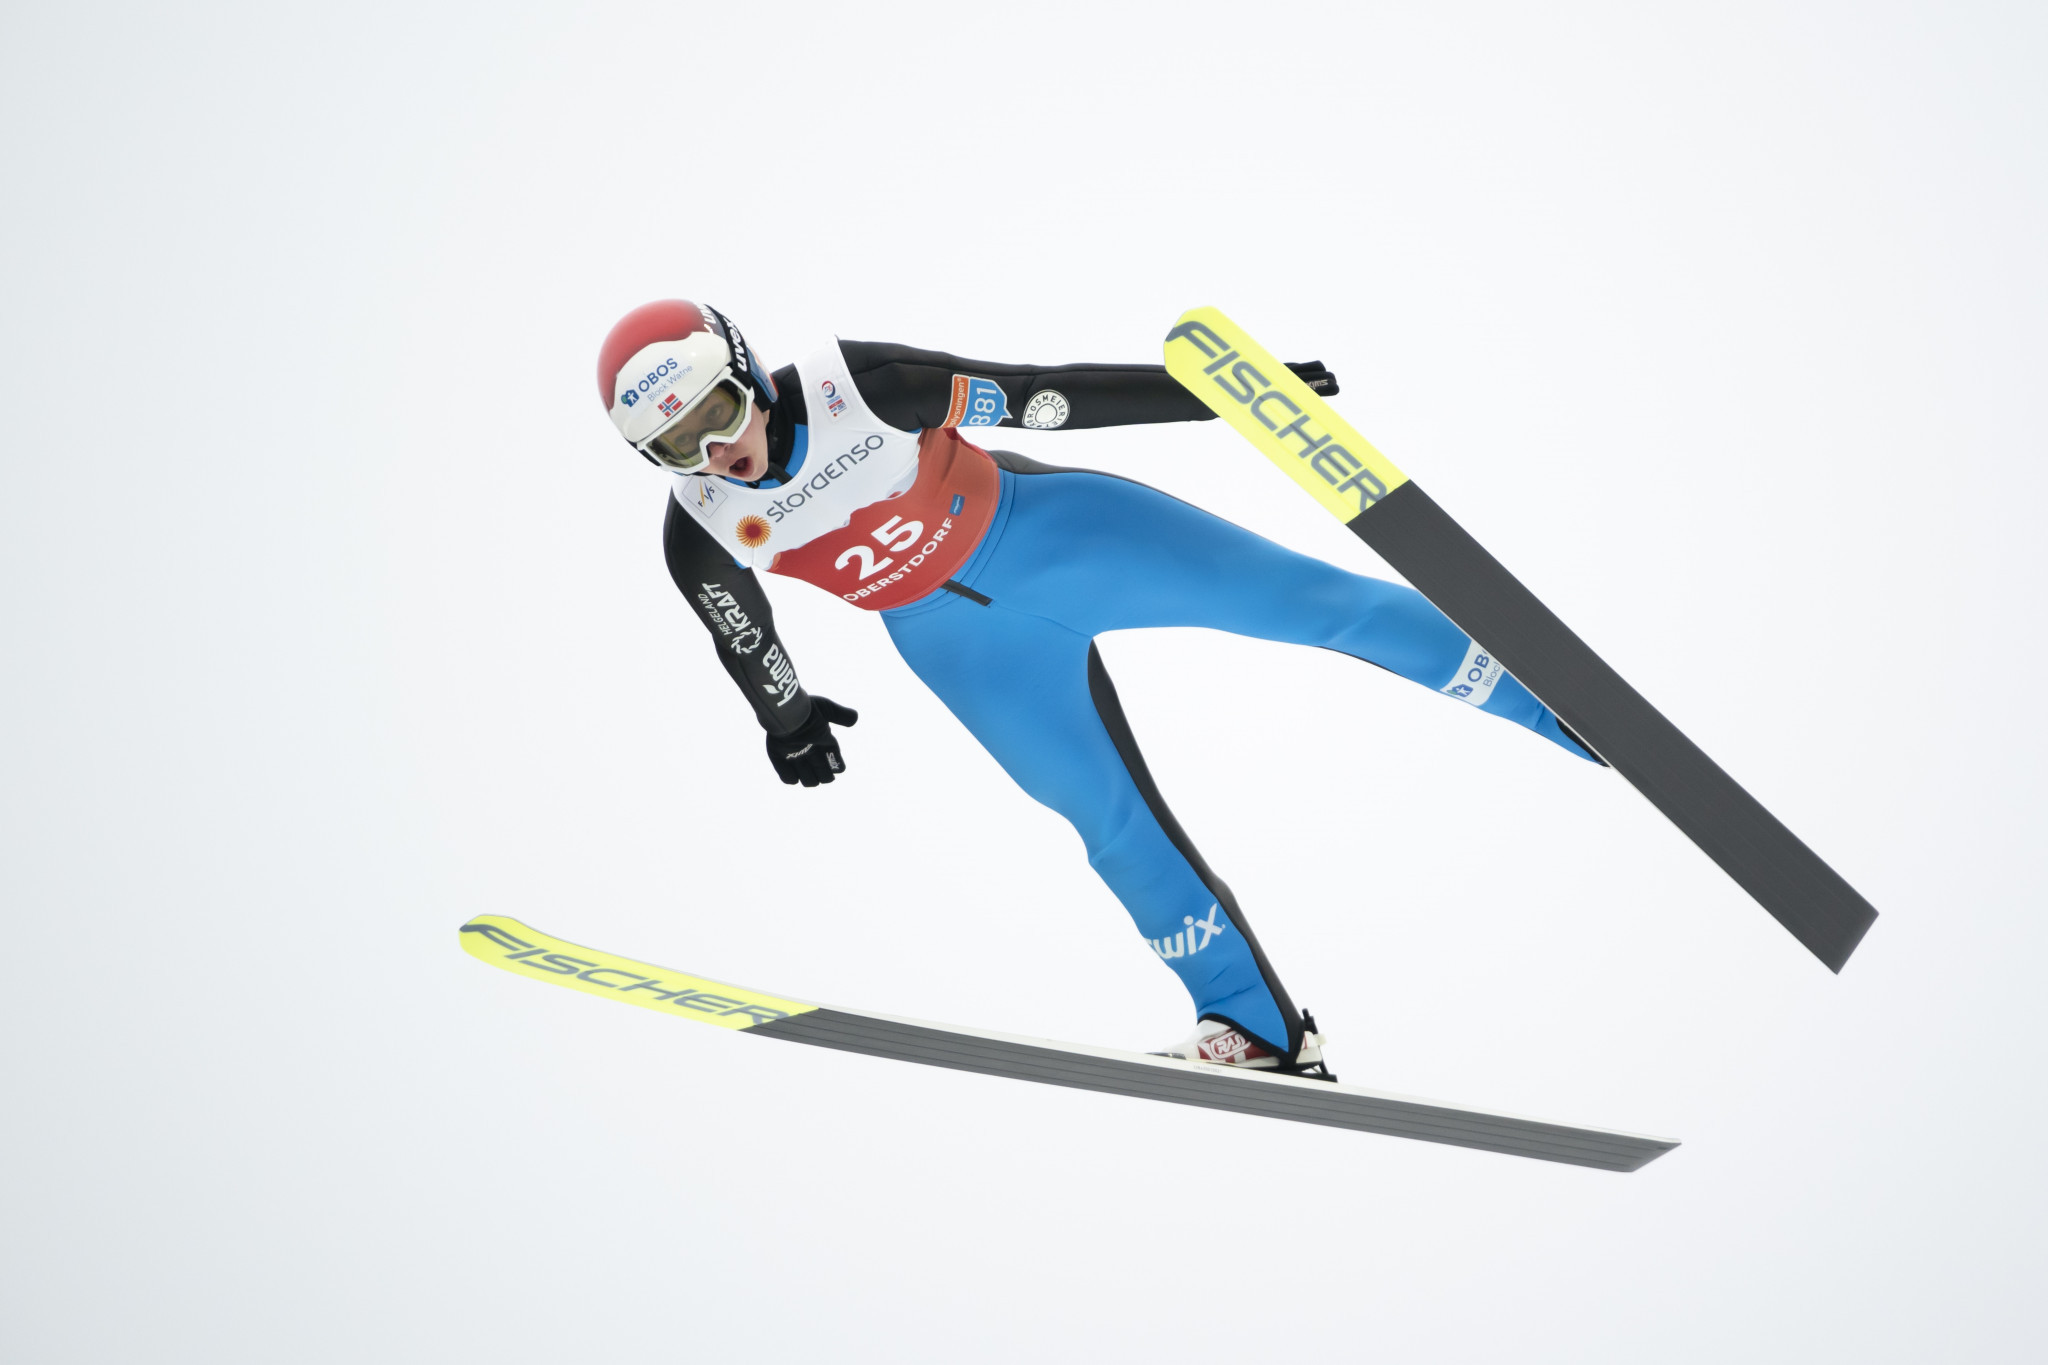 Riiber and Hansen overcome format change to win Otepää Nordic Combined World Cup